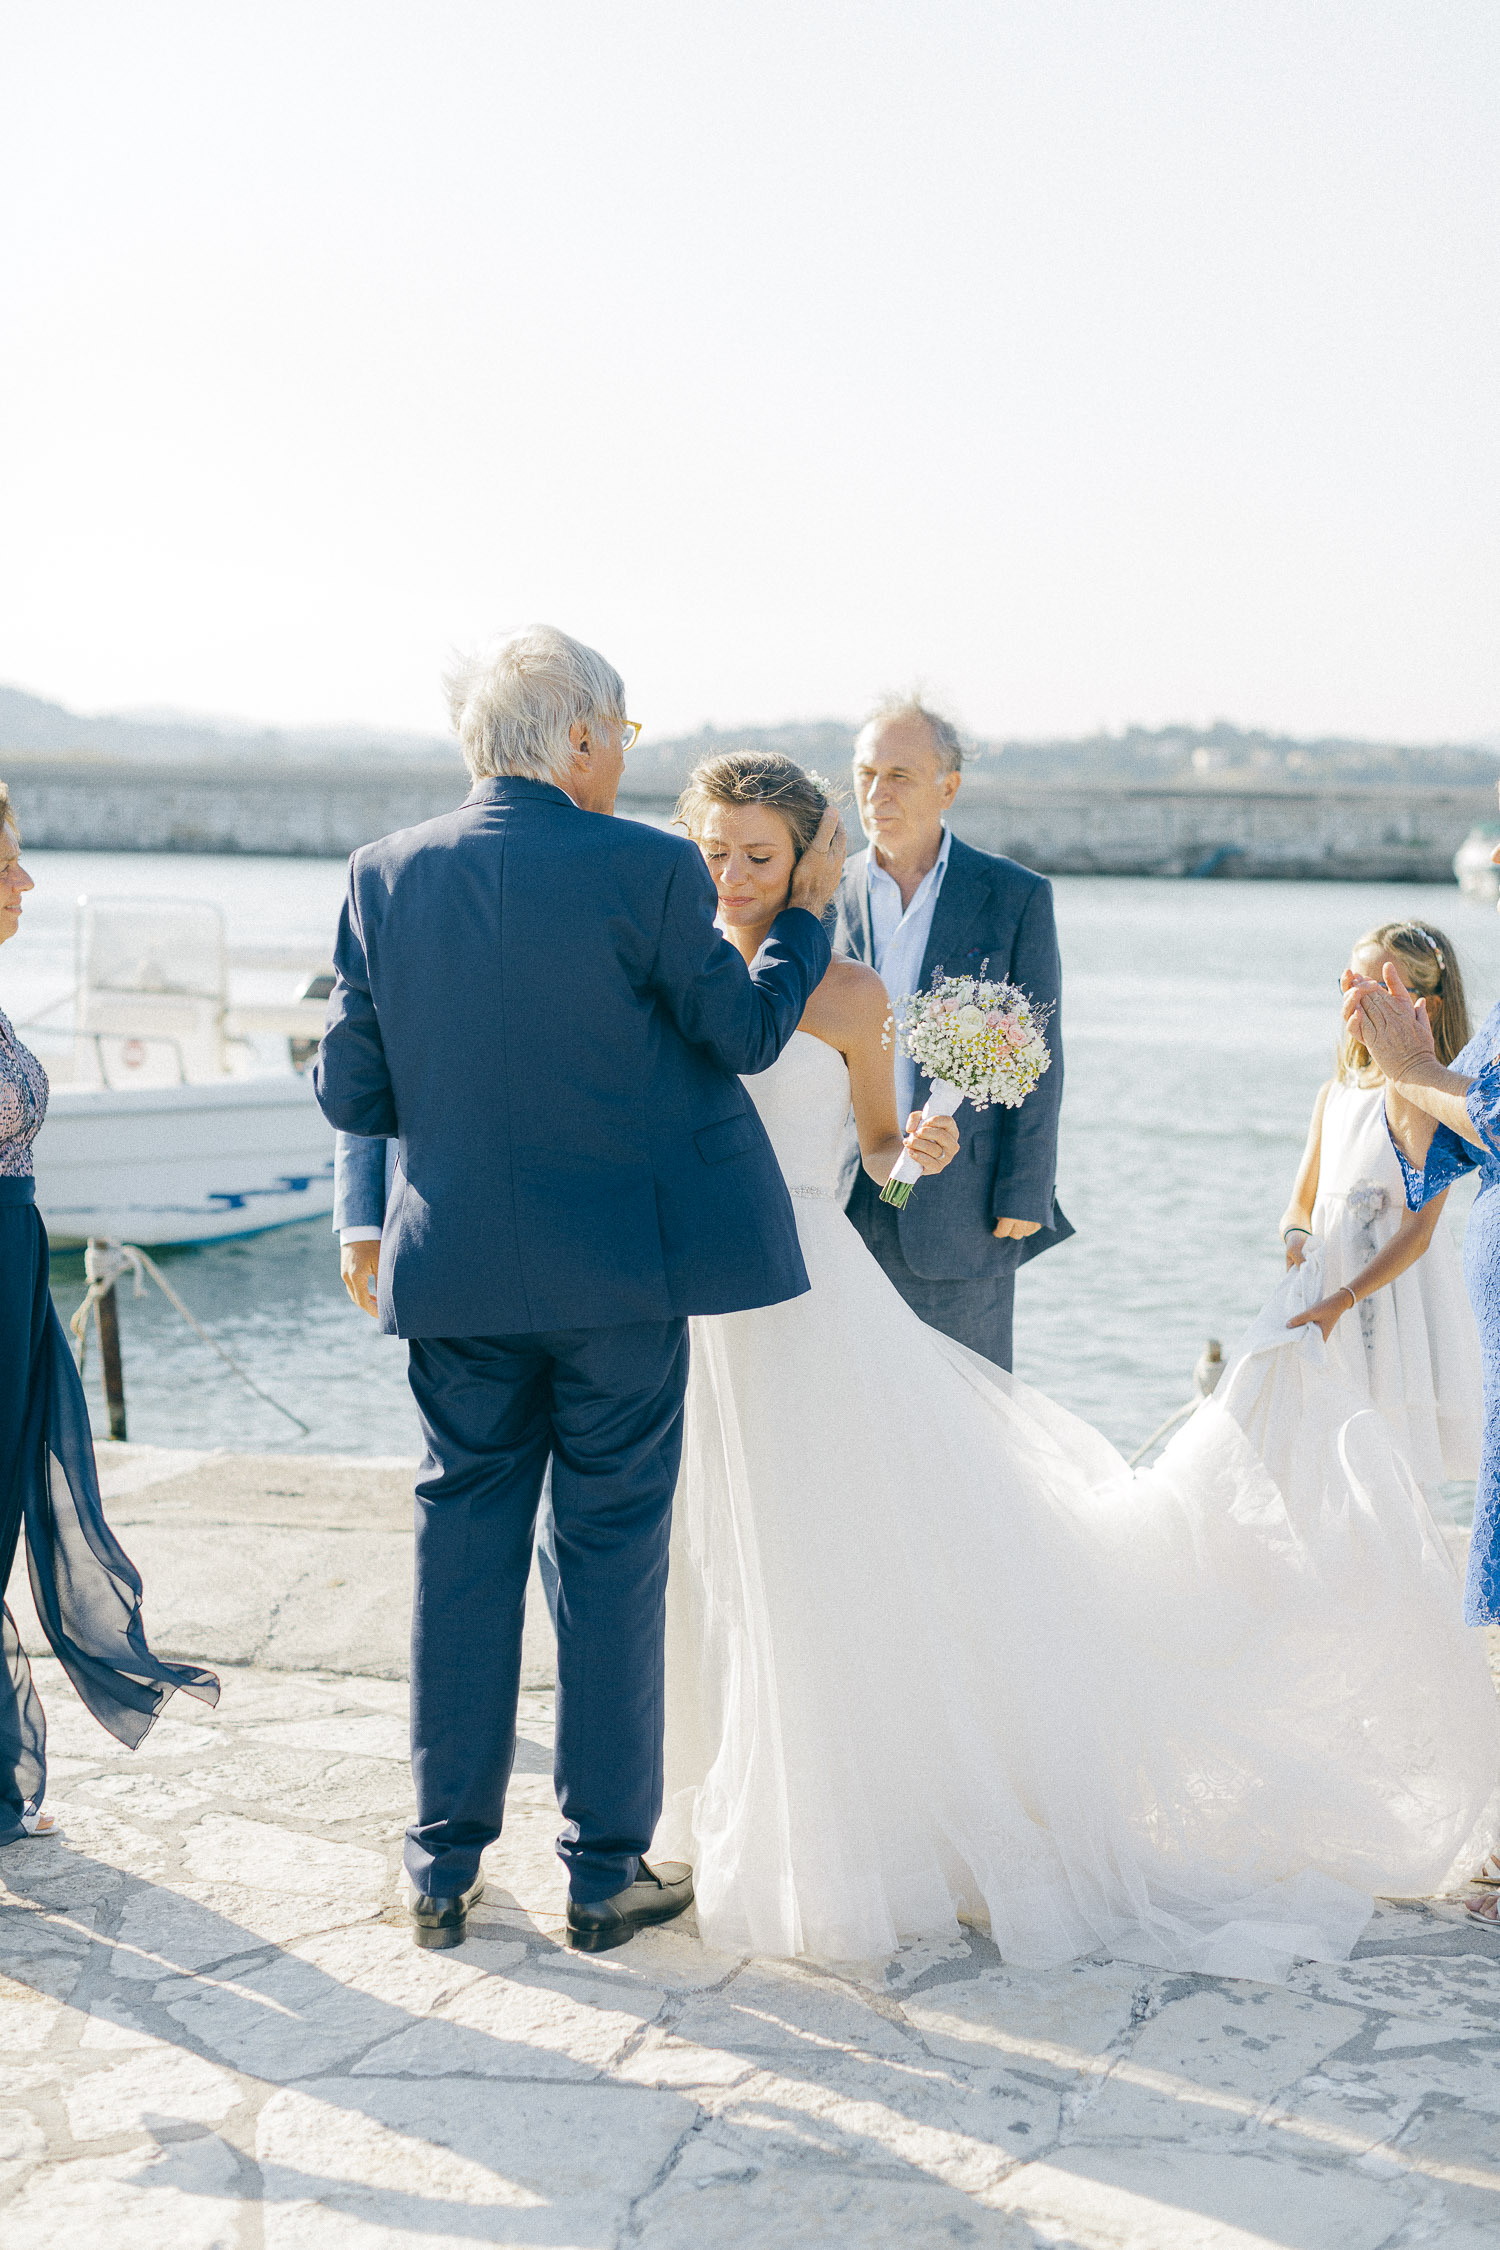 A touching moment while an Old World micro wedding in Corfu Island